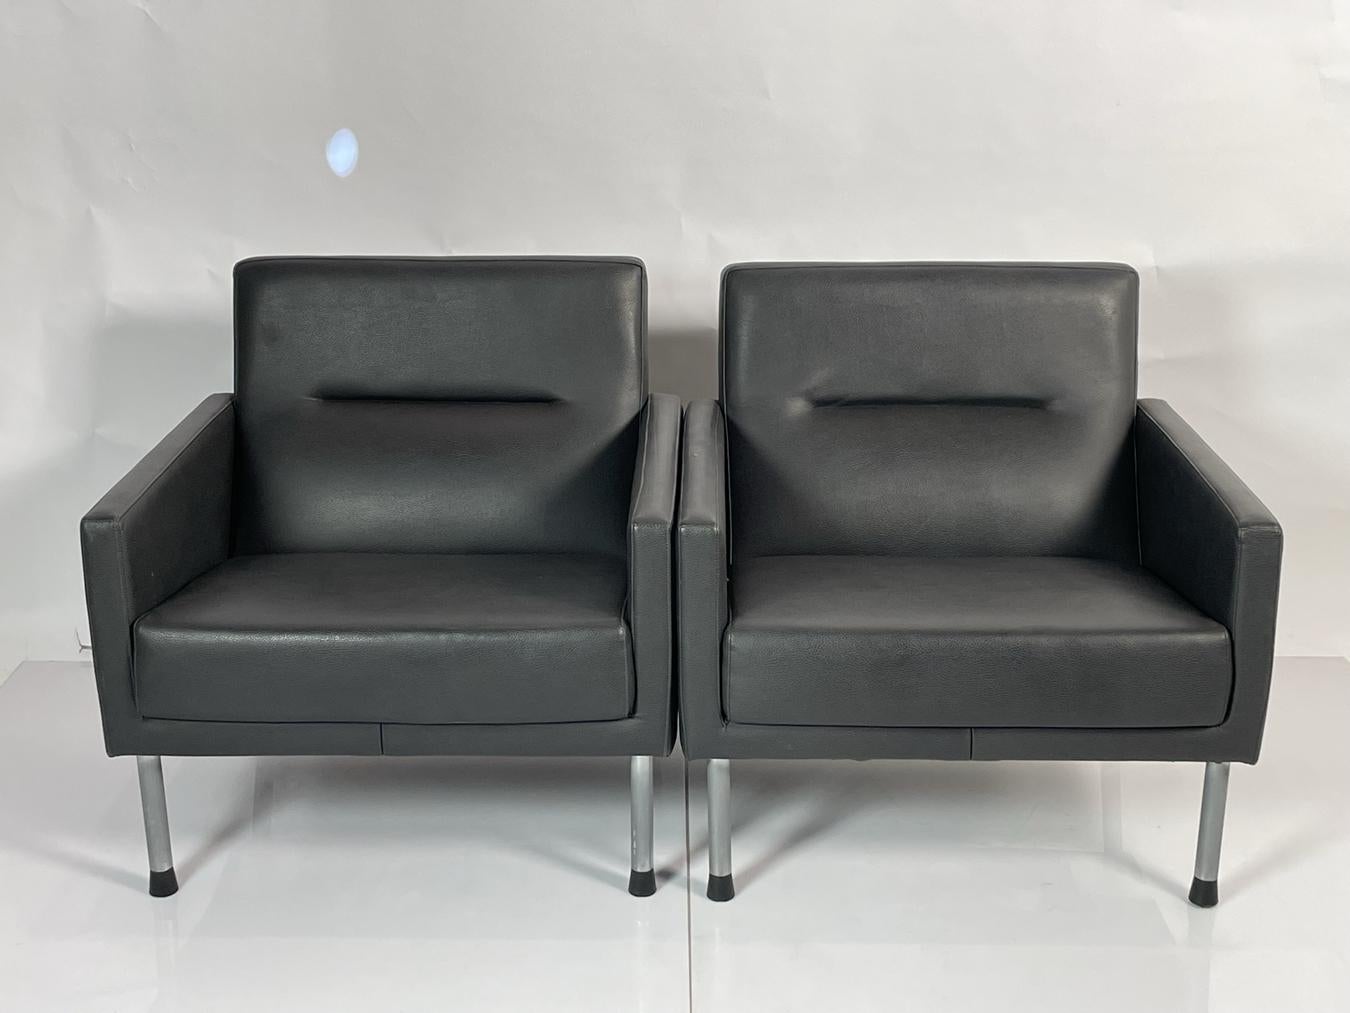 Make your workspace a social space. Sidewalk Lounge Seating is a crisp, lightly scaled, and portable collection for comfort and mobility. A lounge chair with a high back for added comfort and privacy features a horizontal tucked upholstery detail,